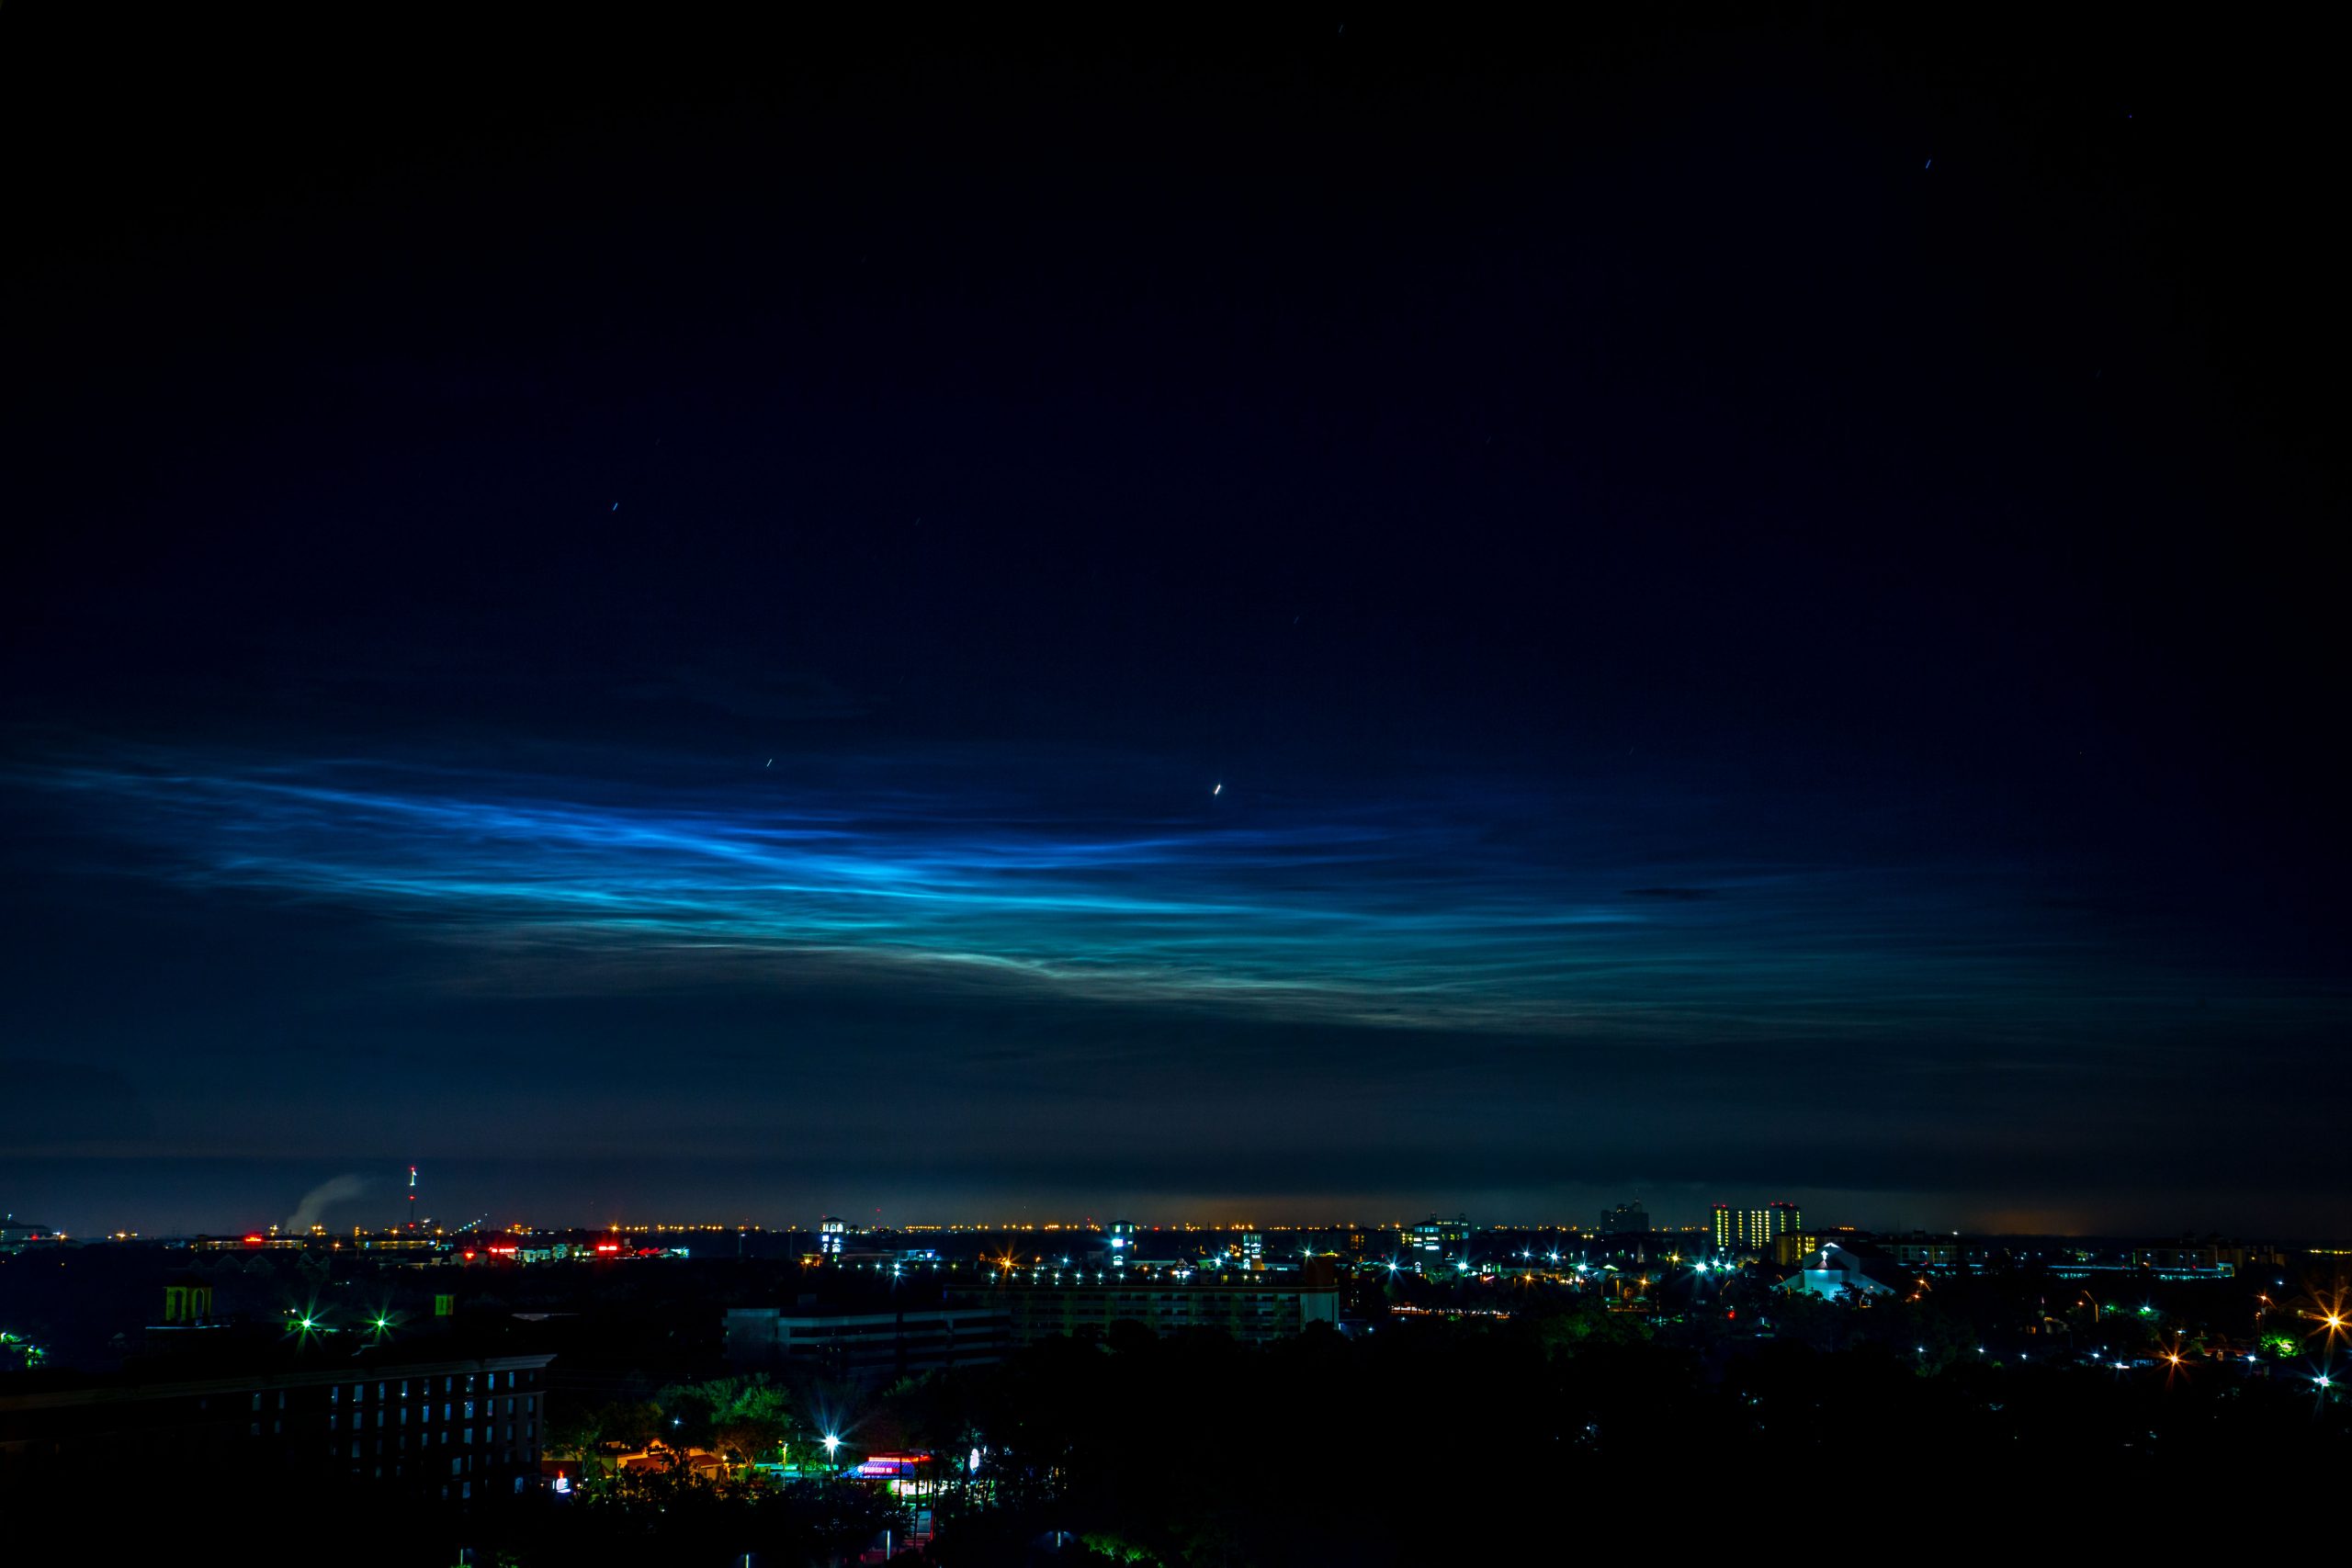 Noctilucent clouds over orlando, florida, in the aftermath of a rocket launch.